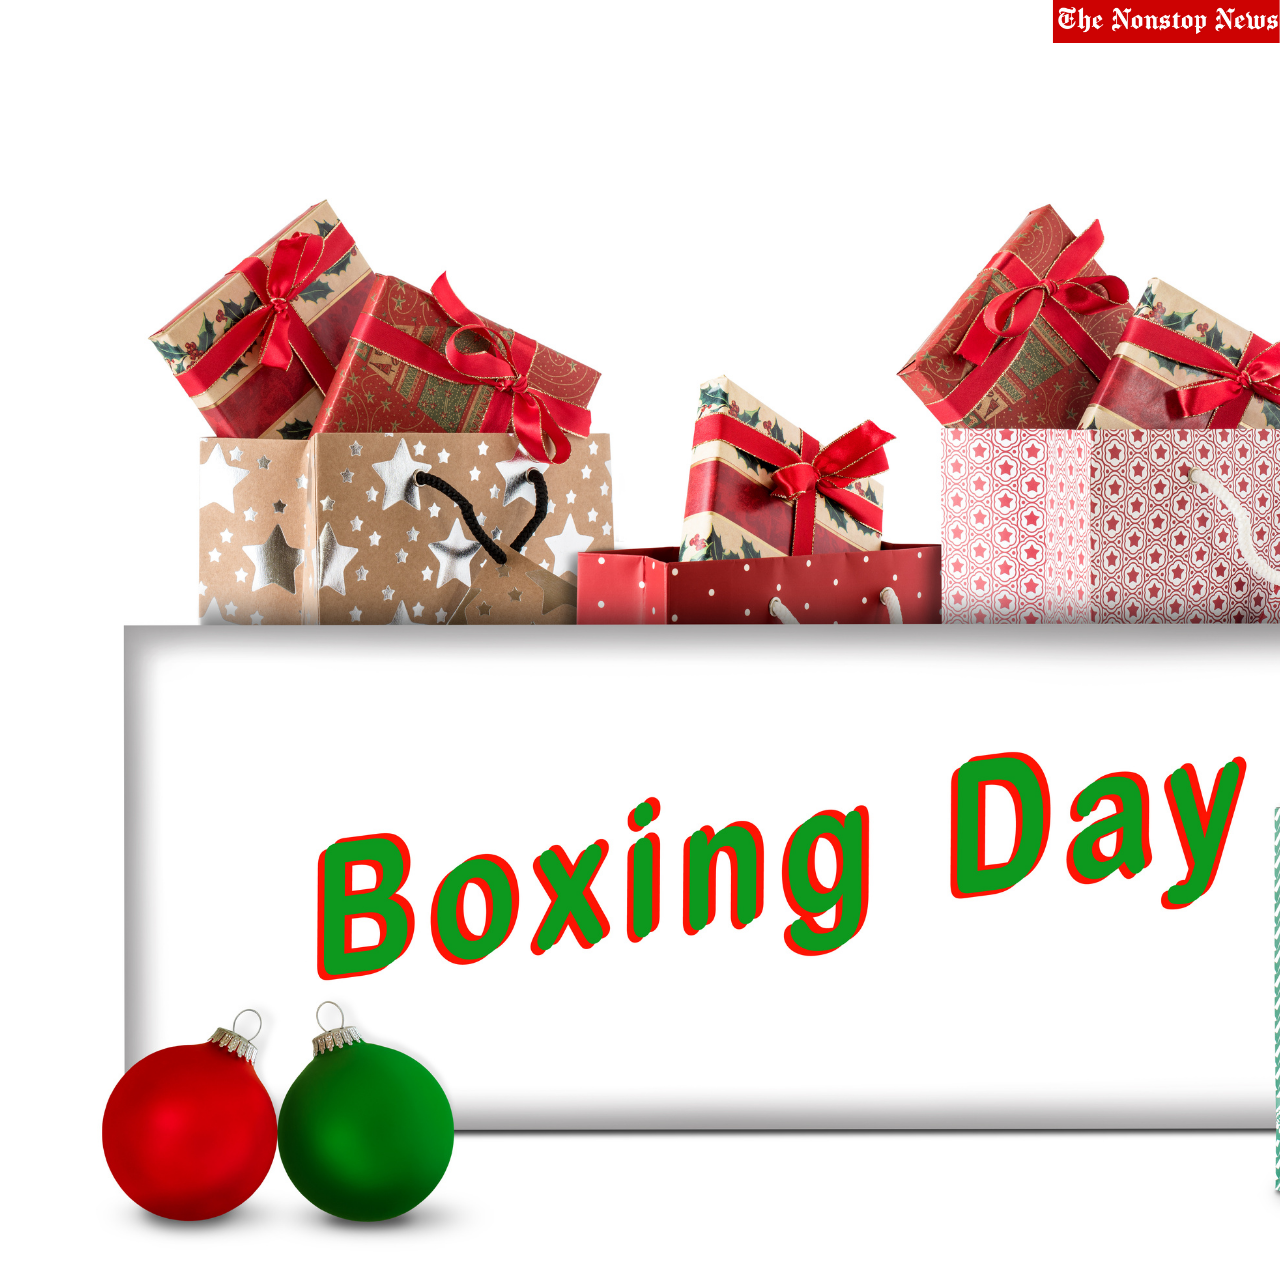 Boxing Day 2021 Instagram Captions, Facebook Posts, WhatsApp Status, Twitter Greetings, Stickers, Memes, gif to share